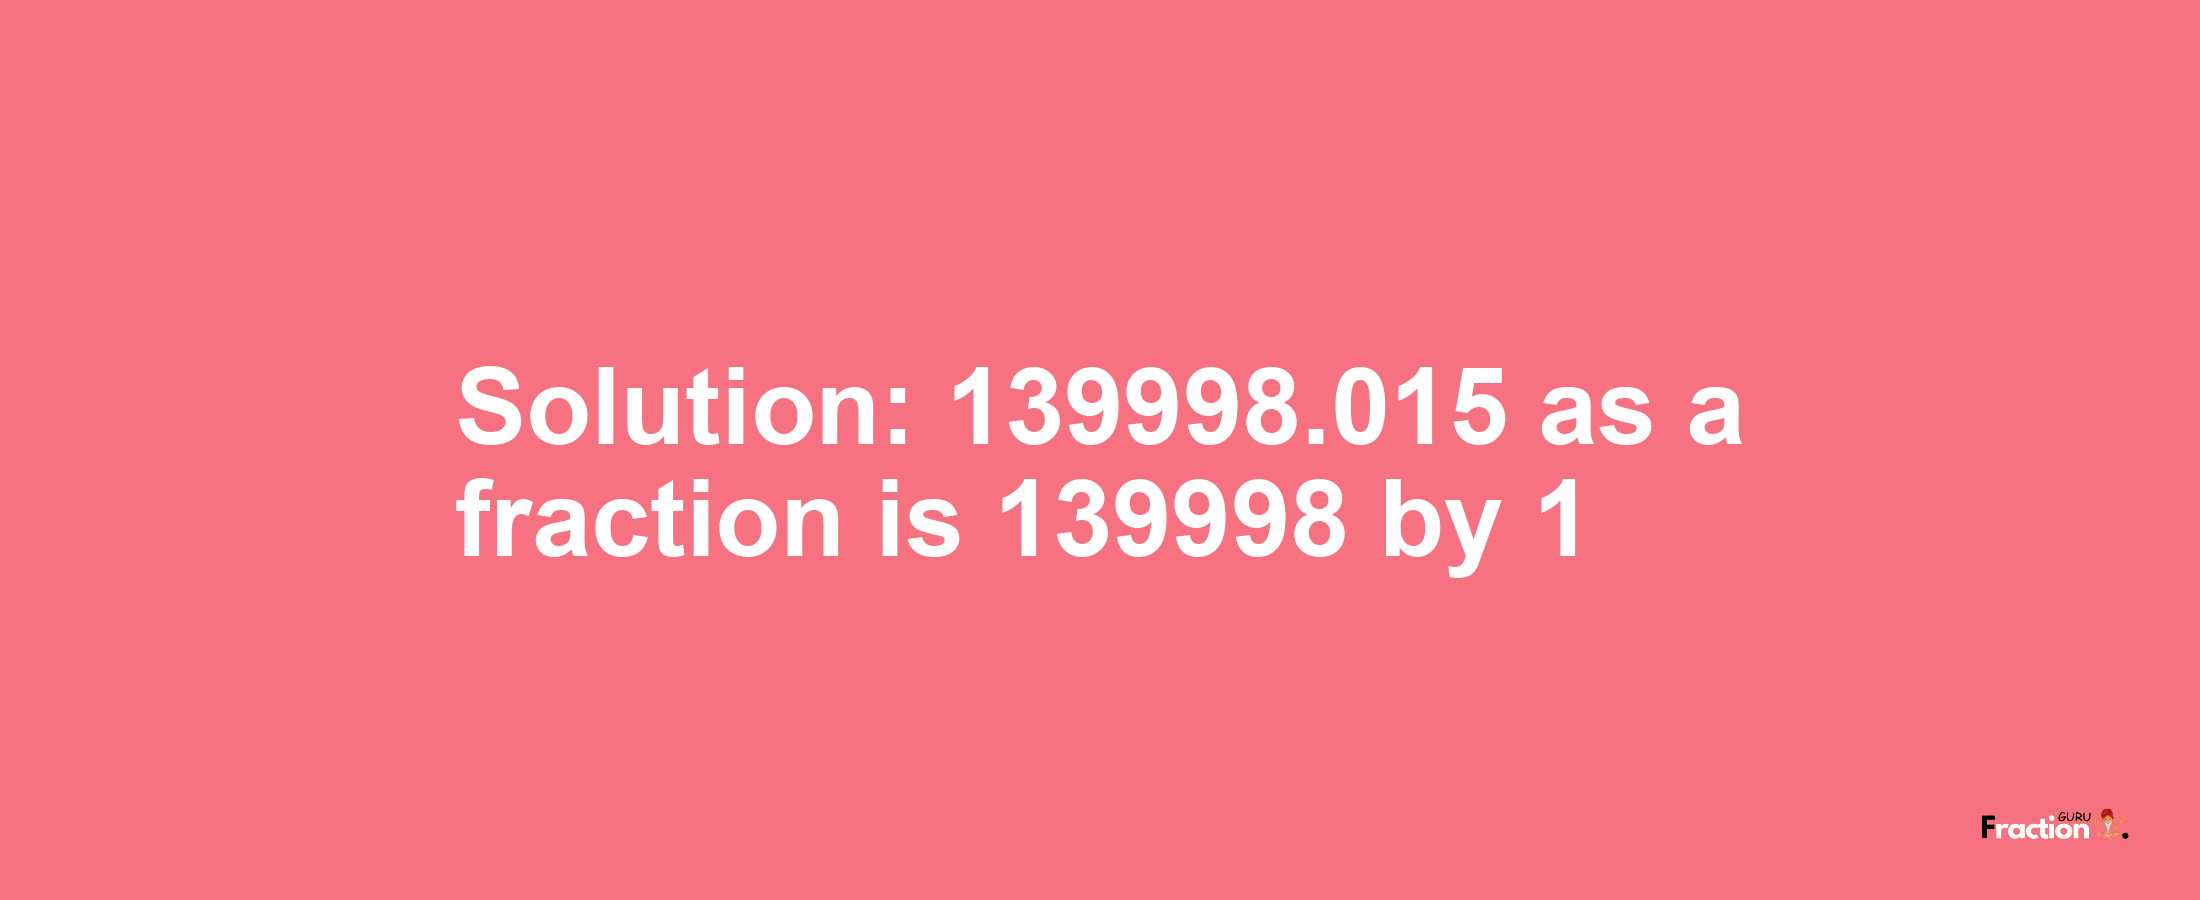 Solution:139998.015 as a fraction is 139998/1